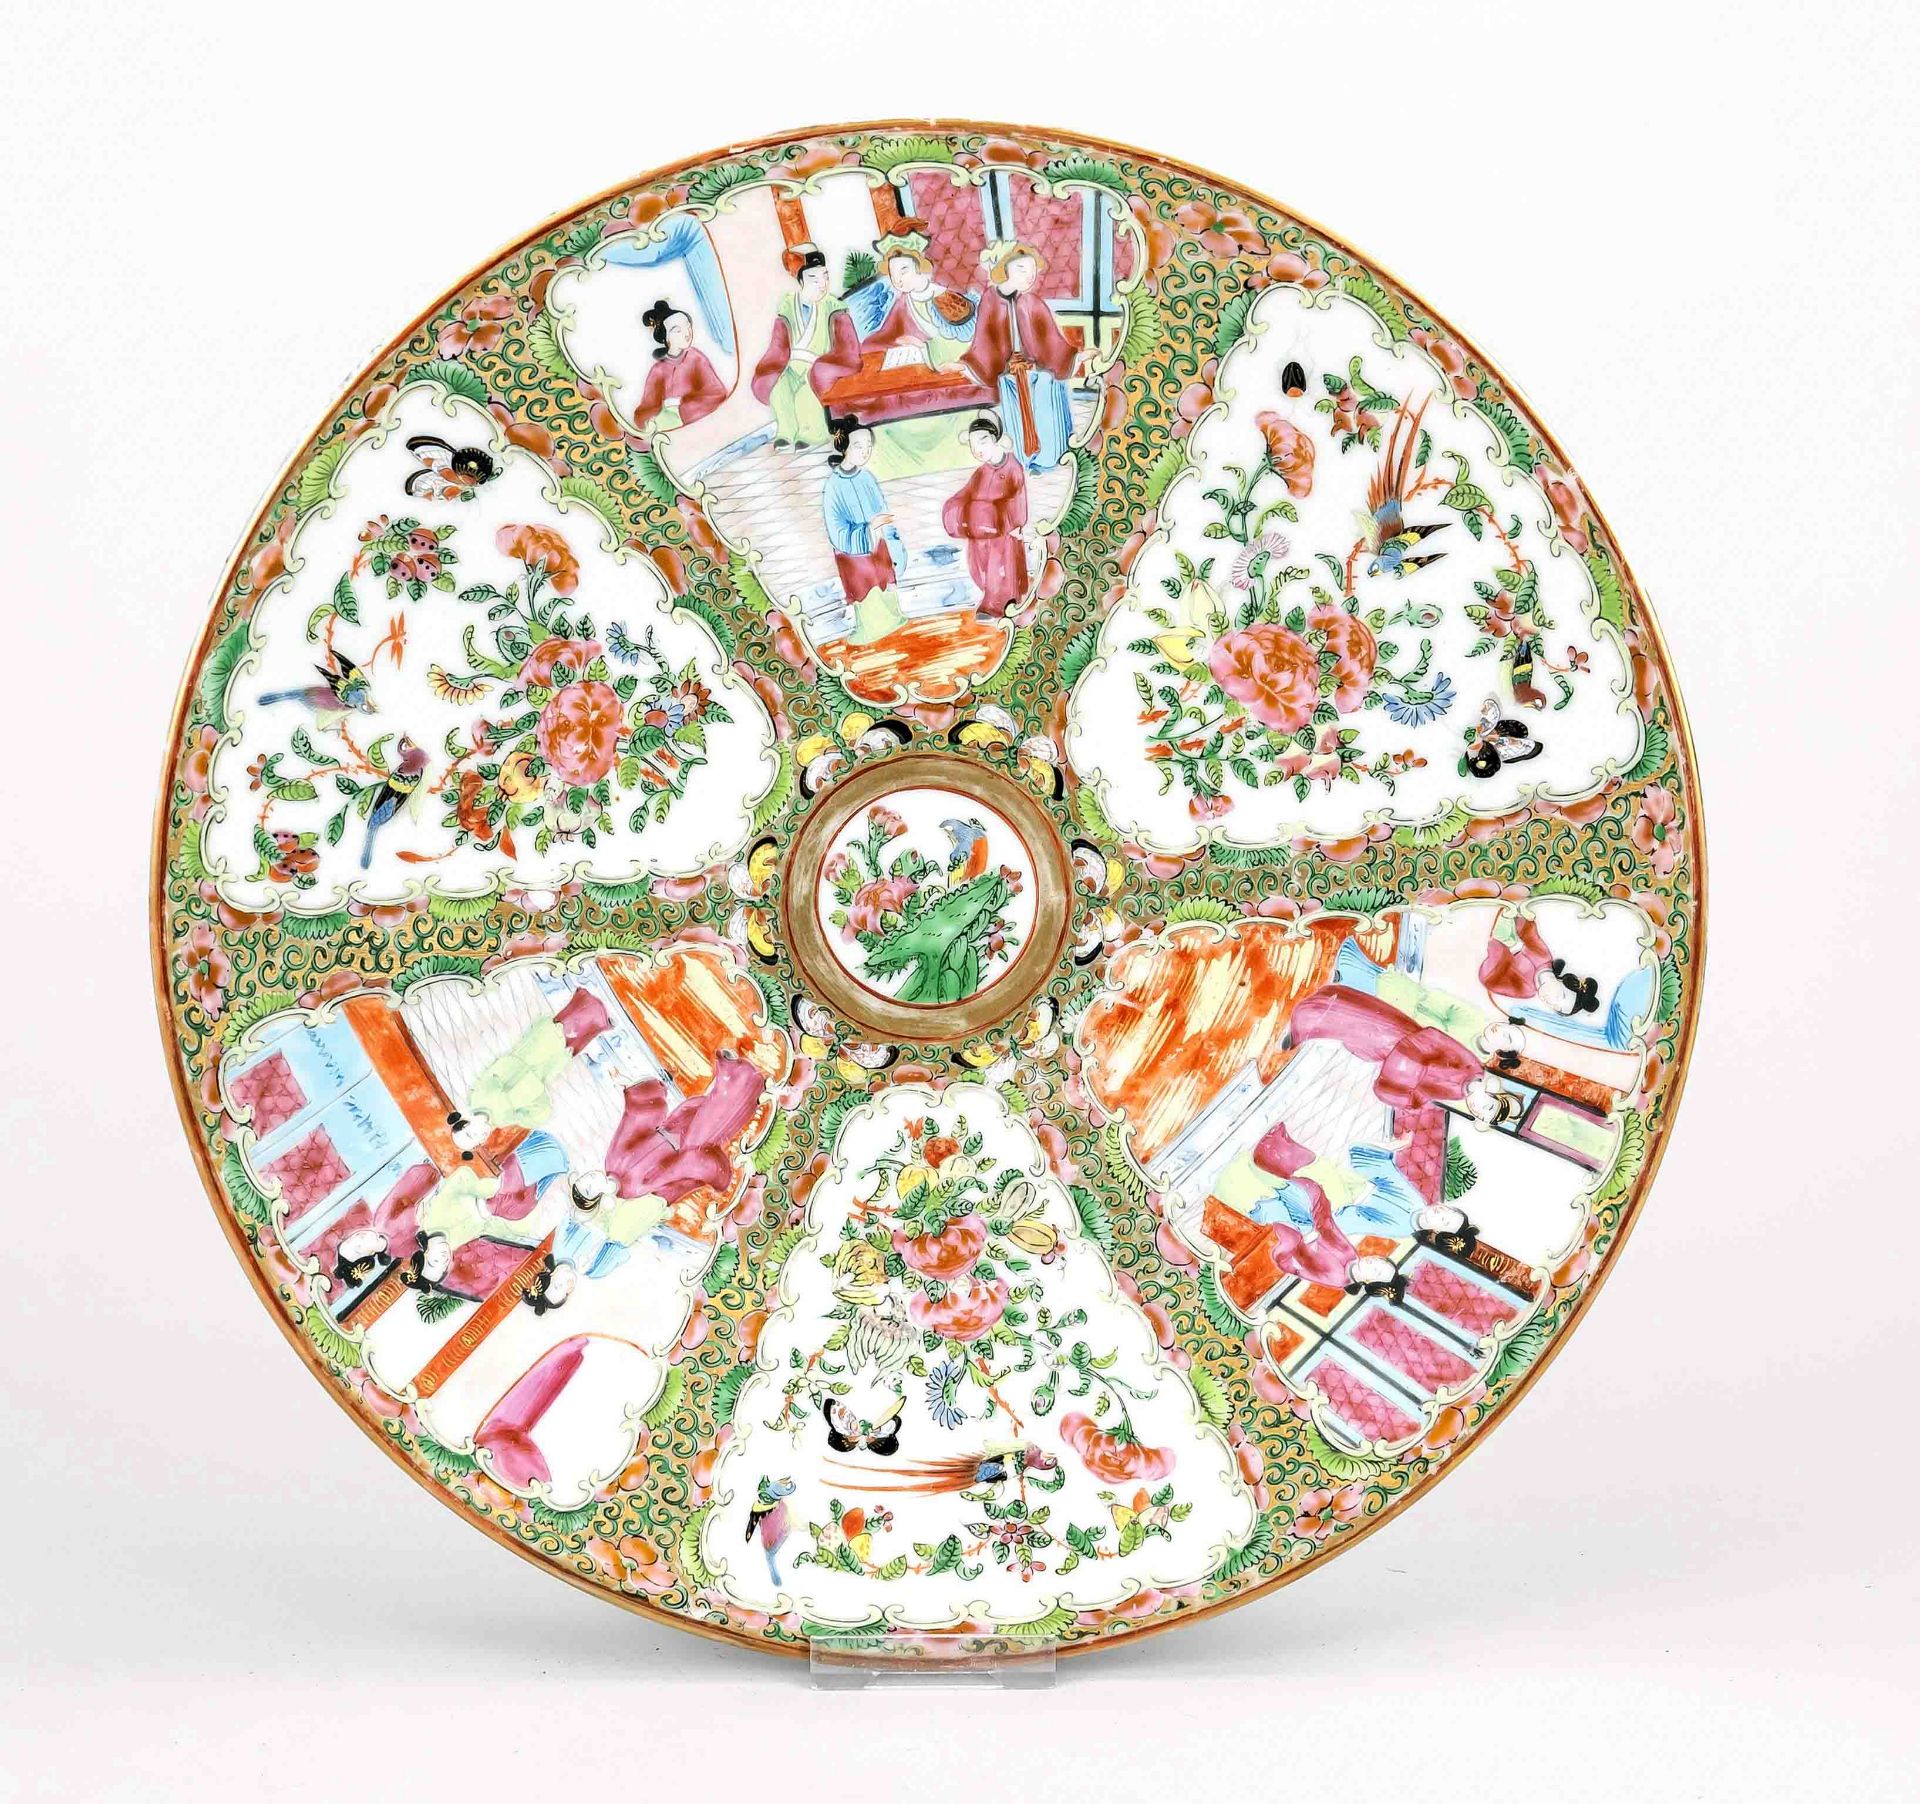 Canton plate rose medallion, South China, Macao, Qing dynasty(1644-1911), 1st half 20th c.,